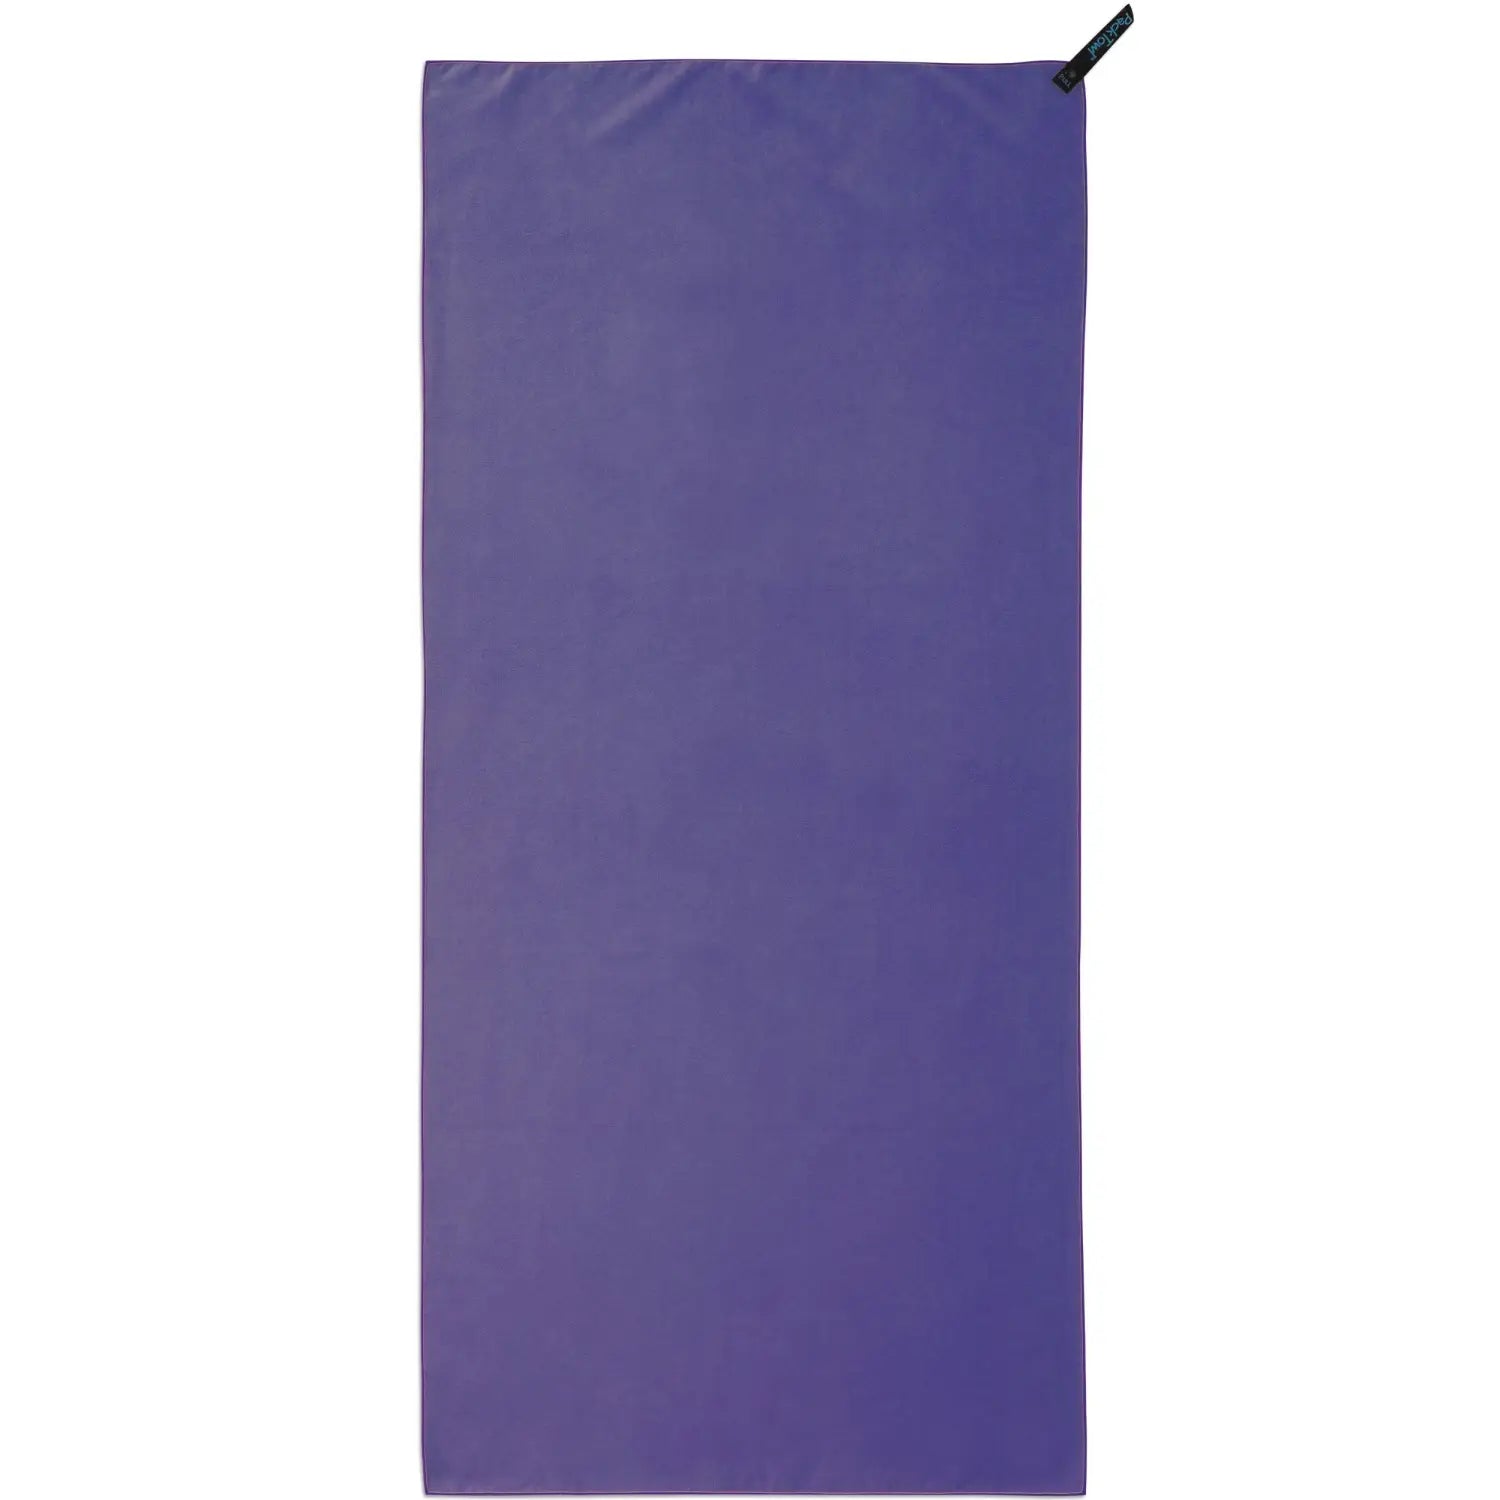 Personal Hand Packtowl shown in Violet, flat front.